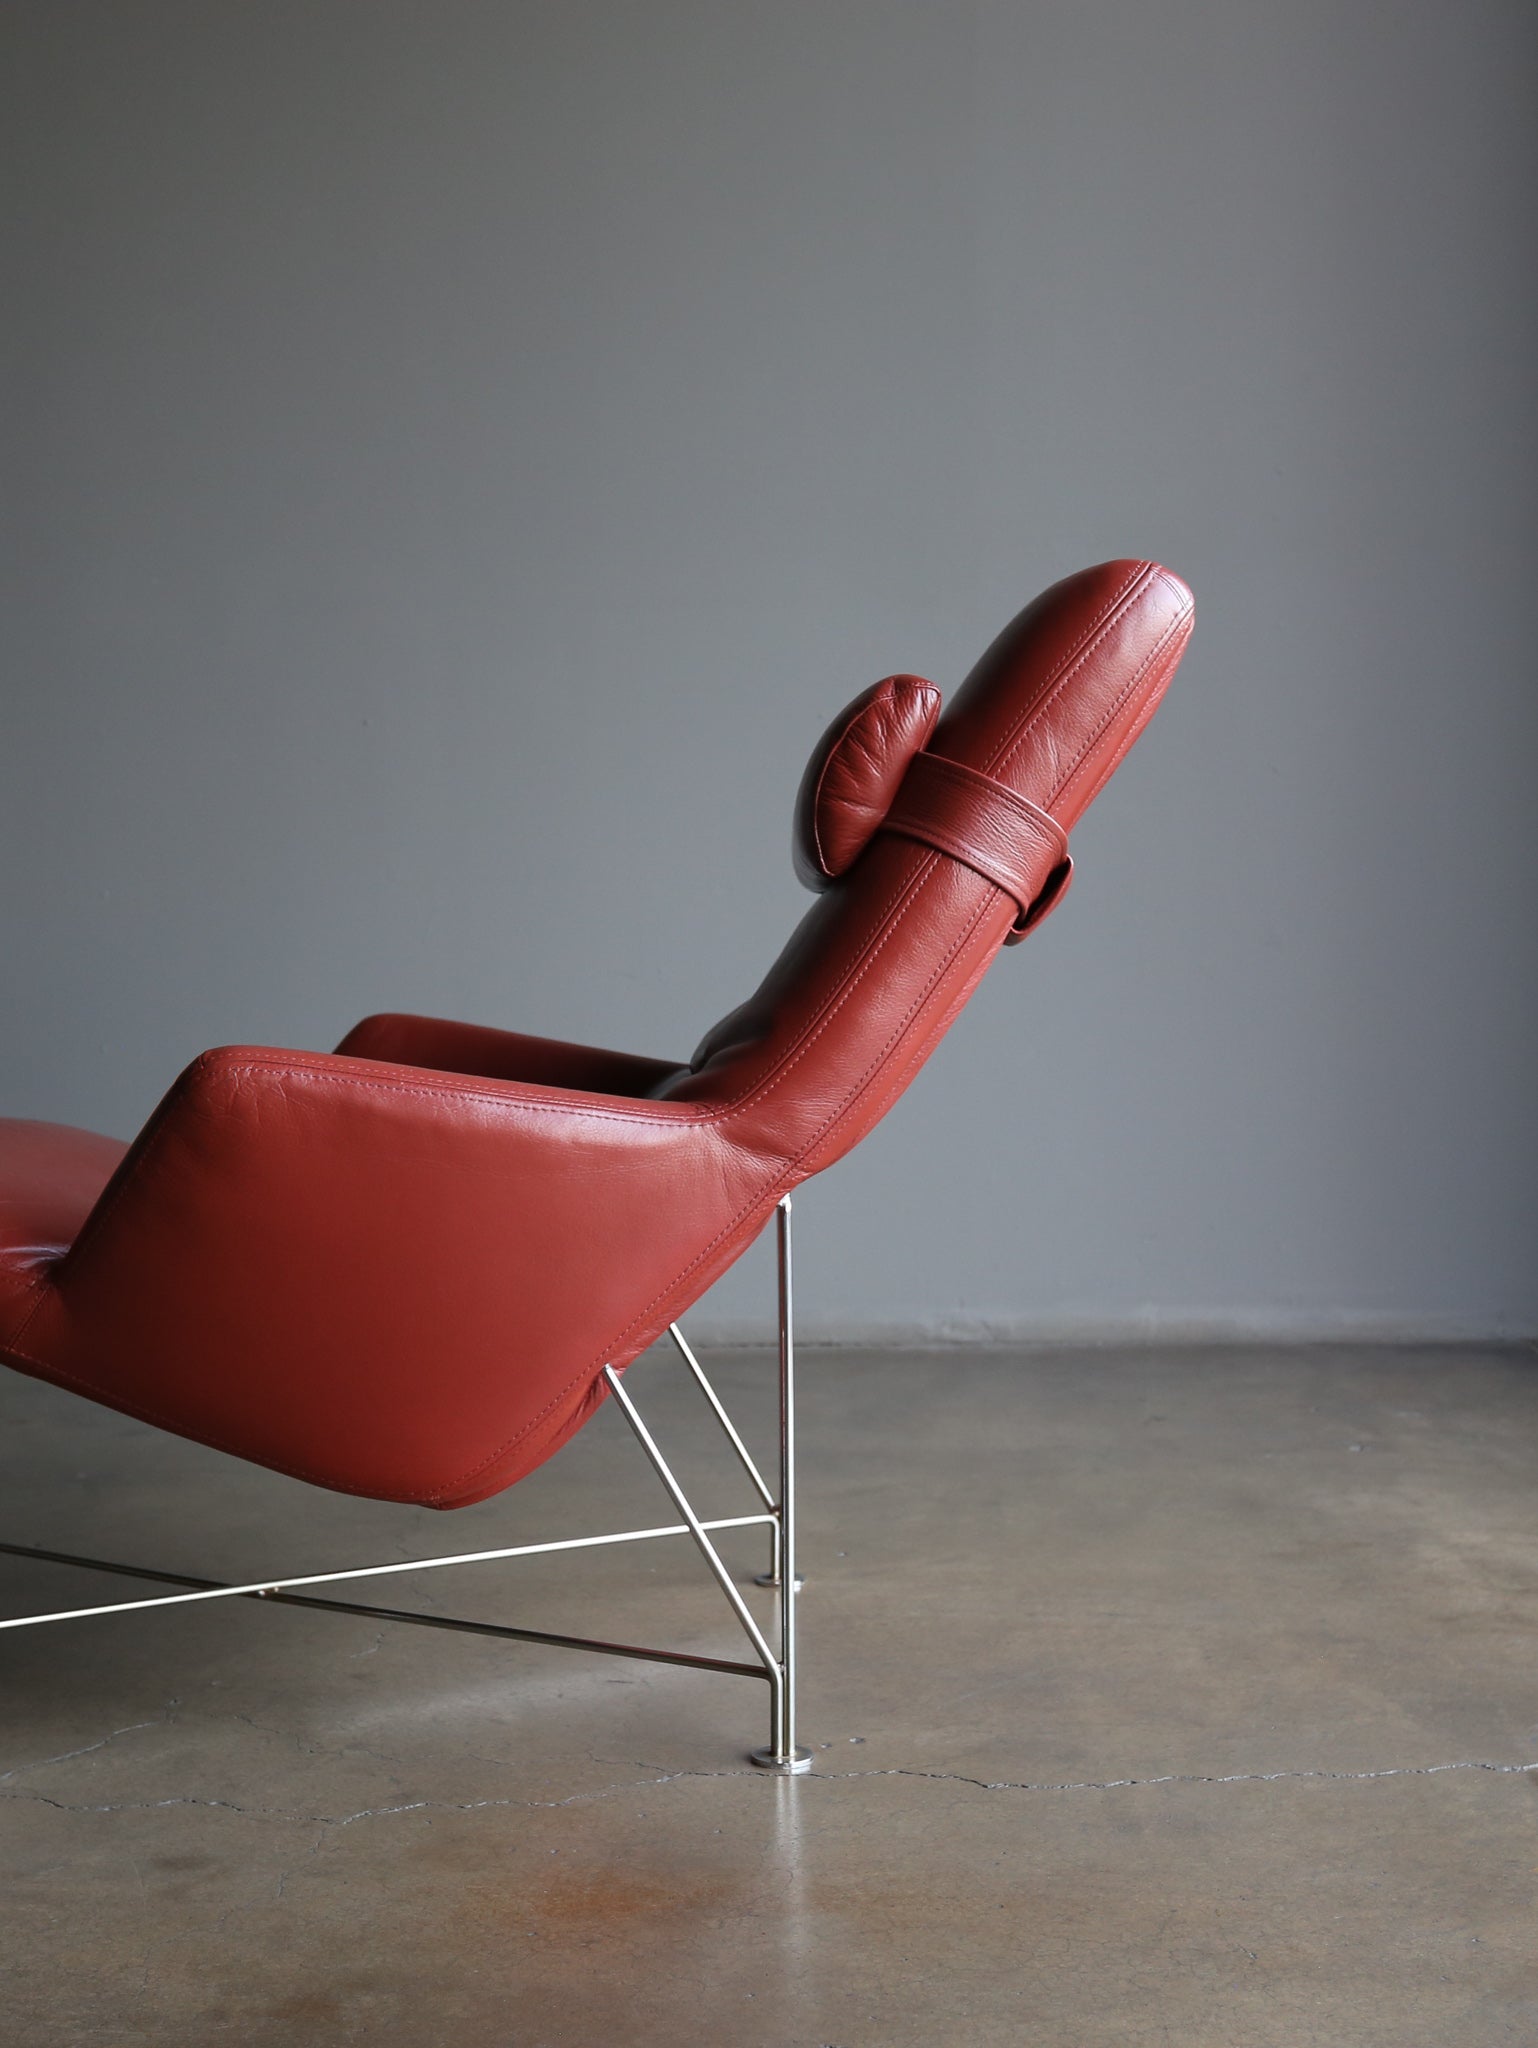 = SOLD = Kenneth Bergenblad Superspider Leather Lounge Chair for DUX, circa 1987